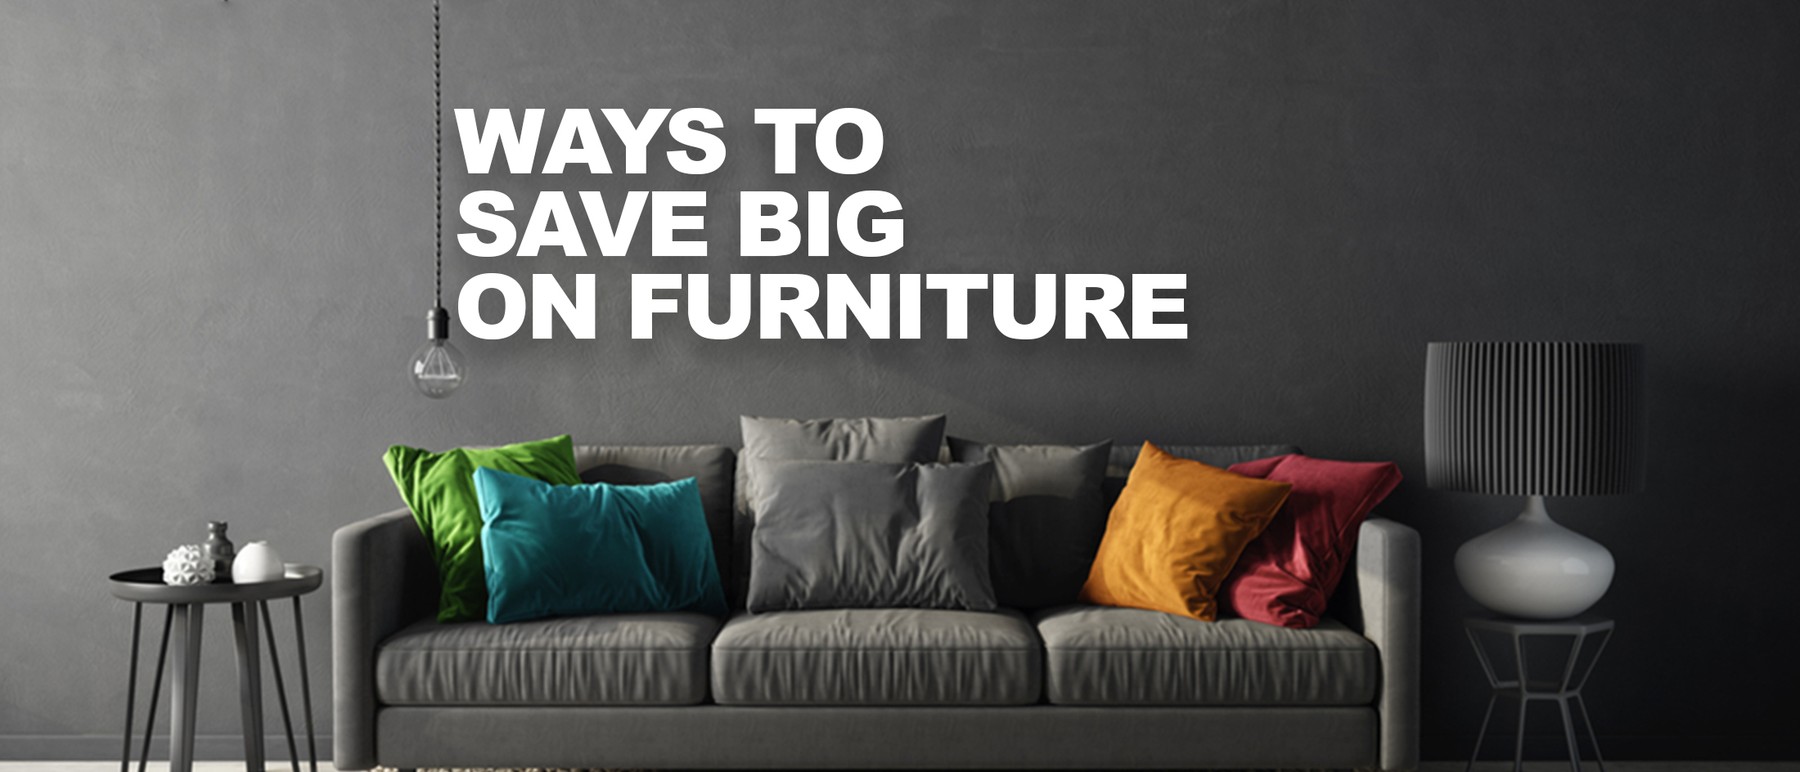 6 Ways to Save on Furniture for Every Room